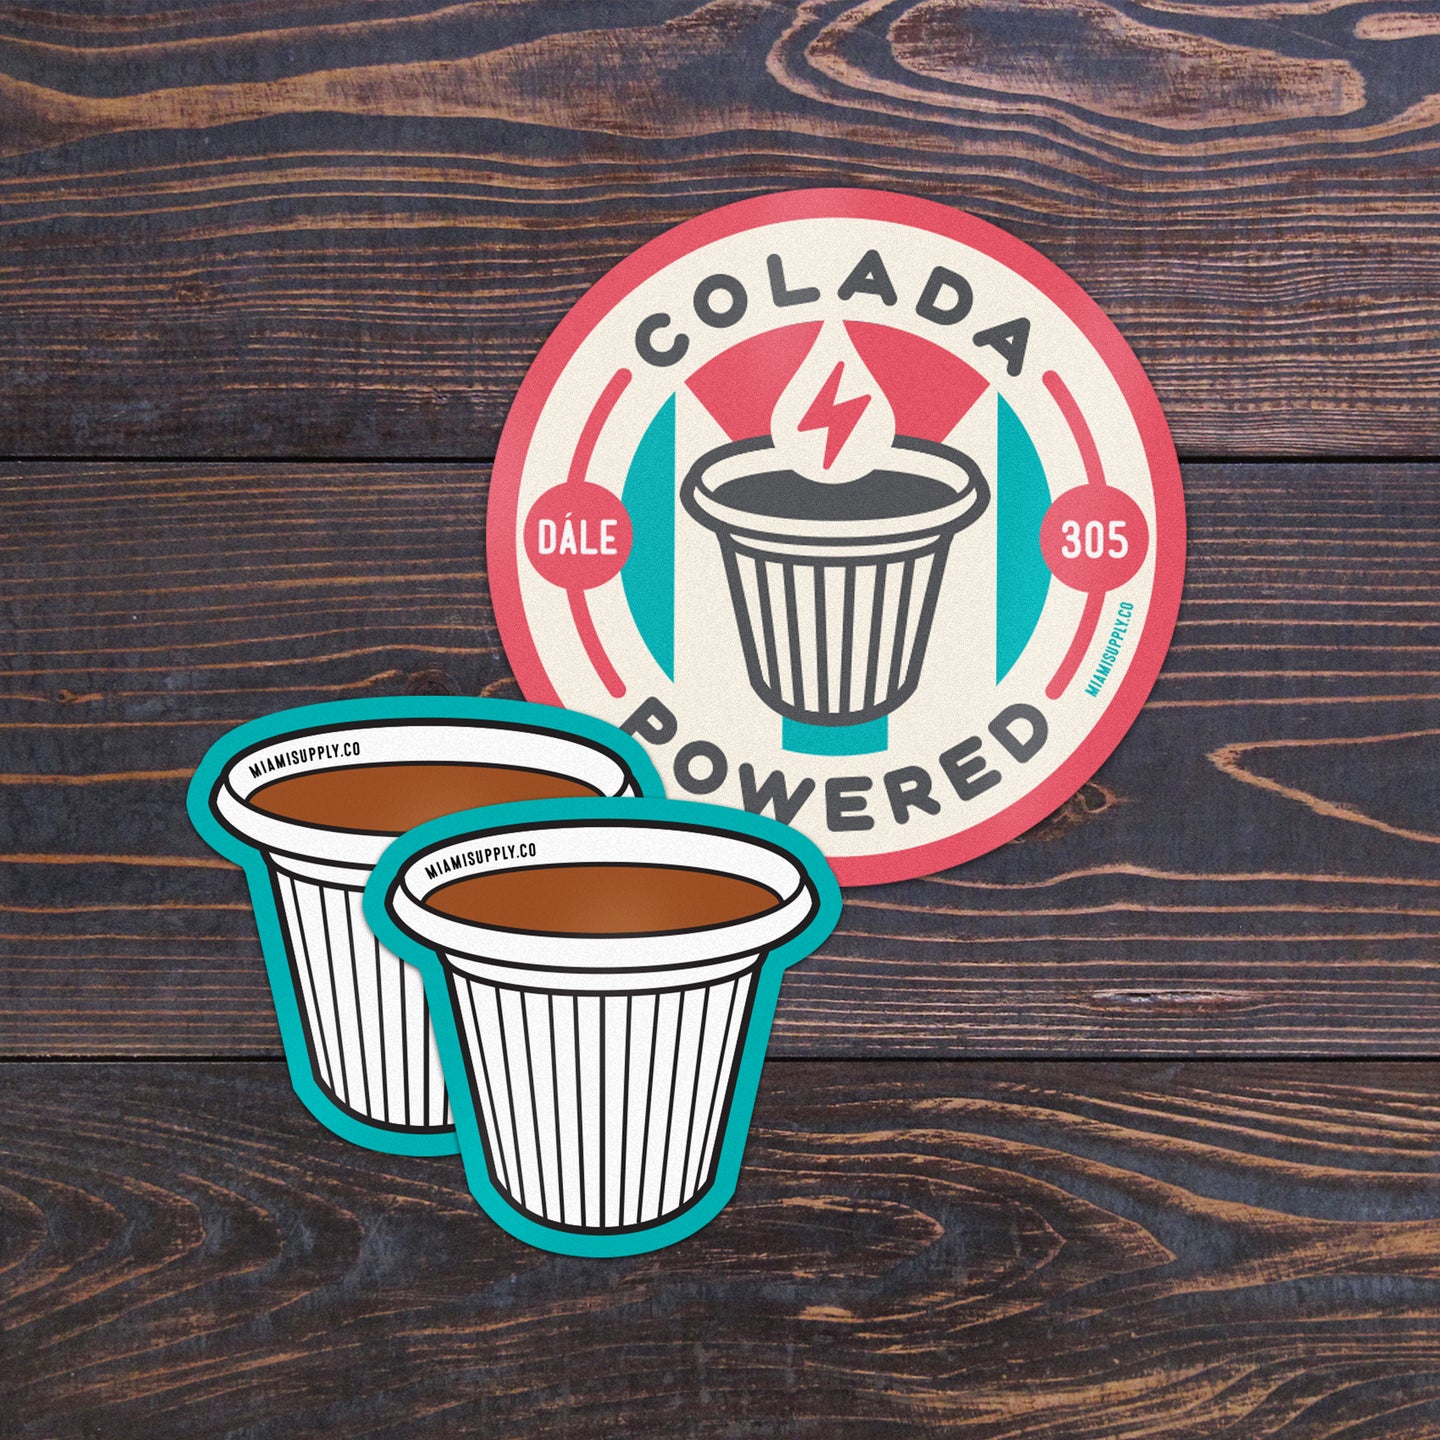 The Cuban coffee mixed cafecito sticker 3-pack.